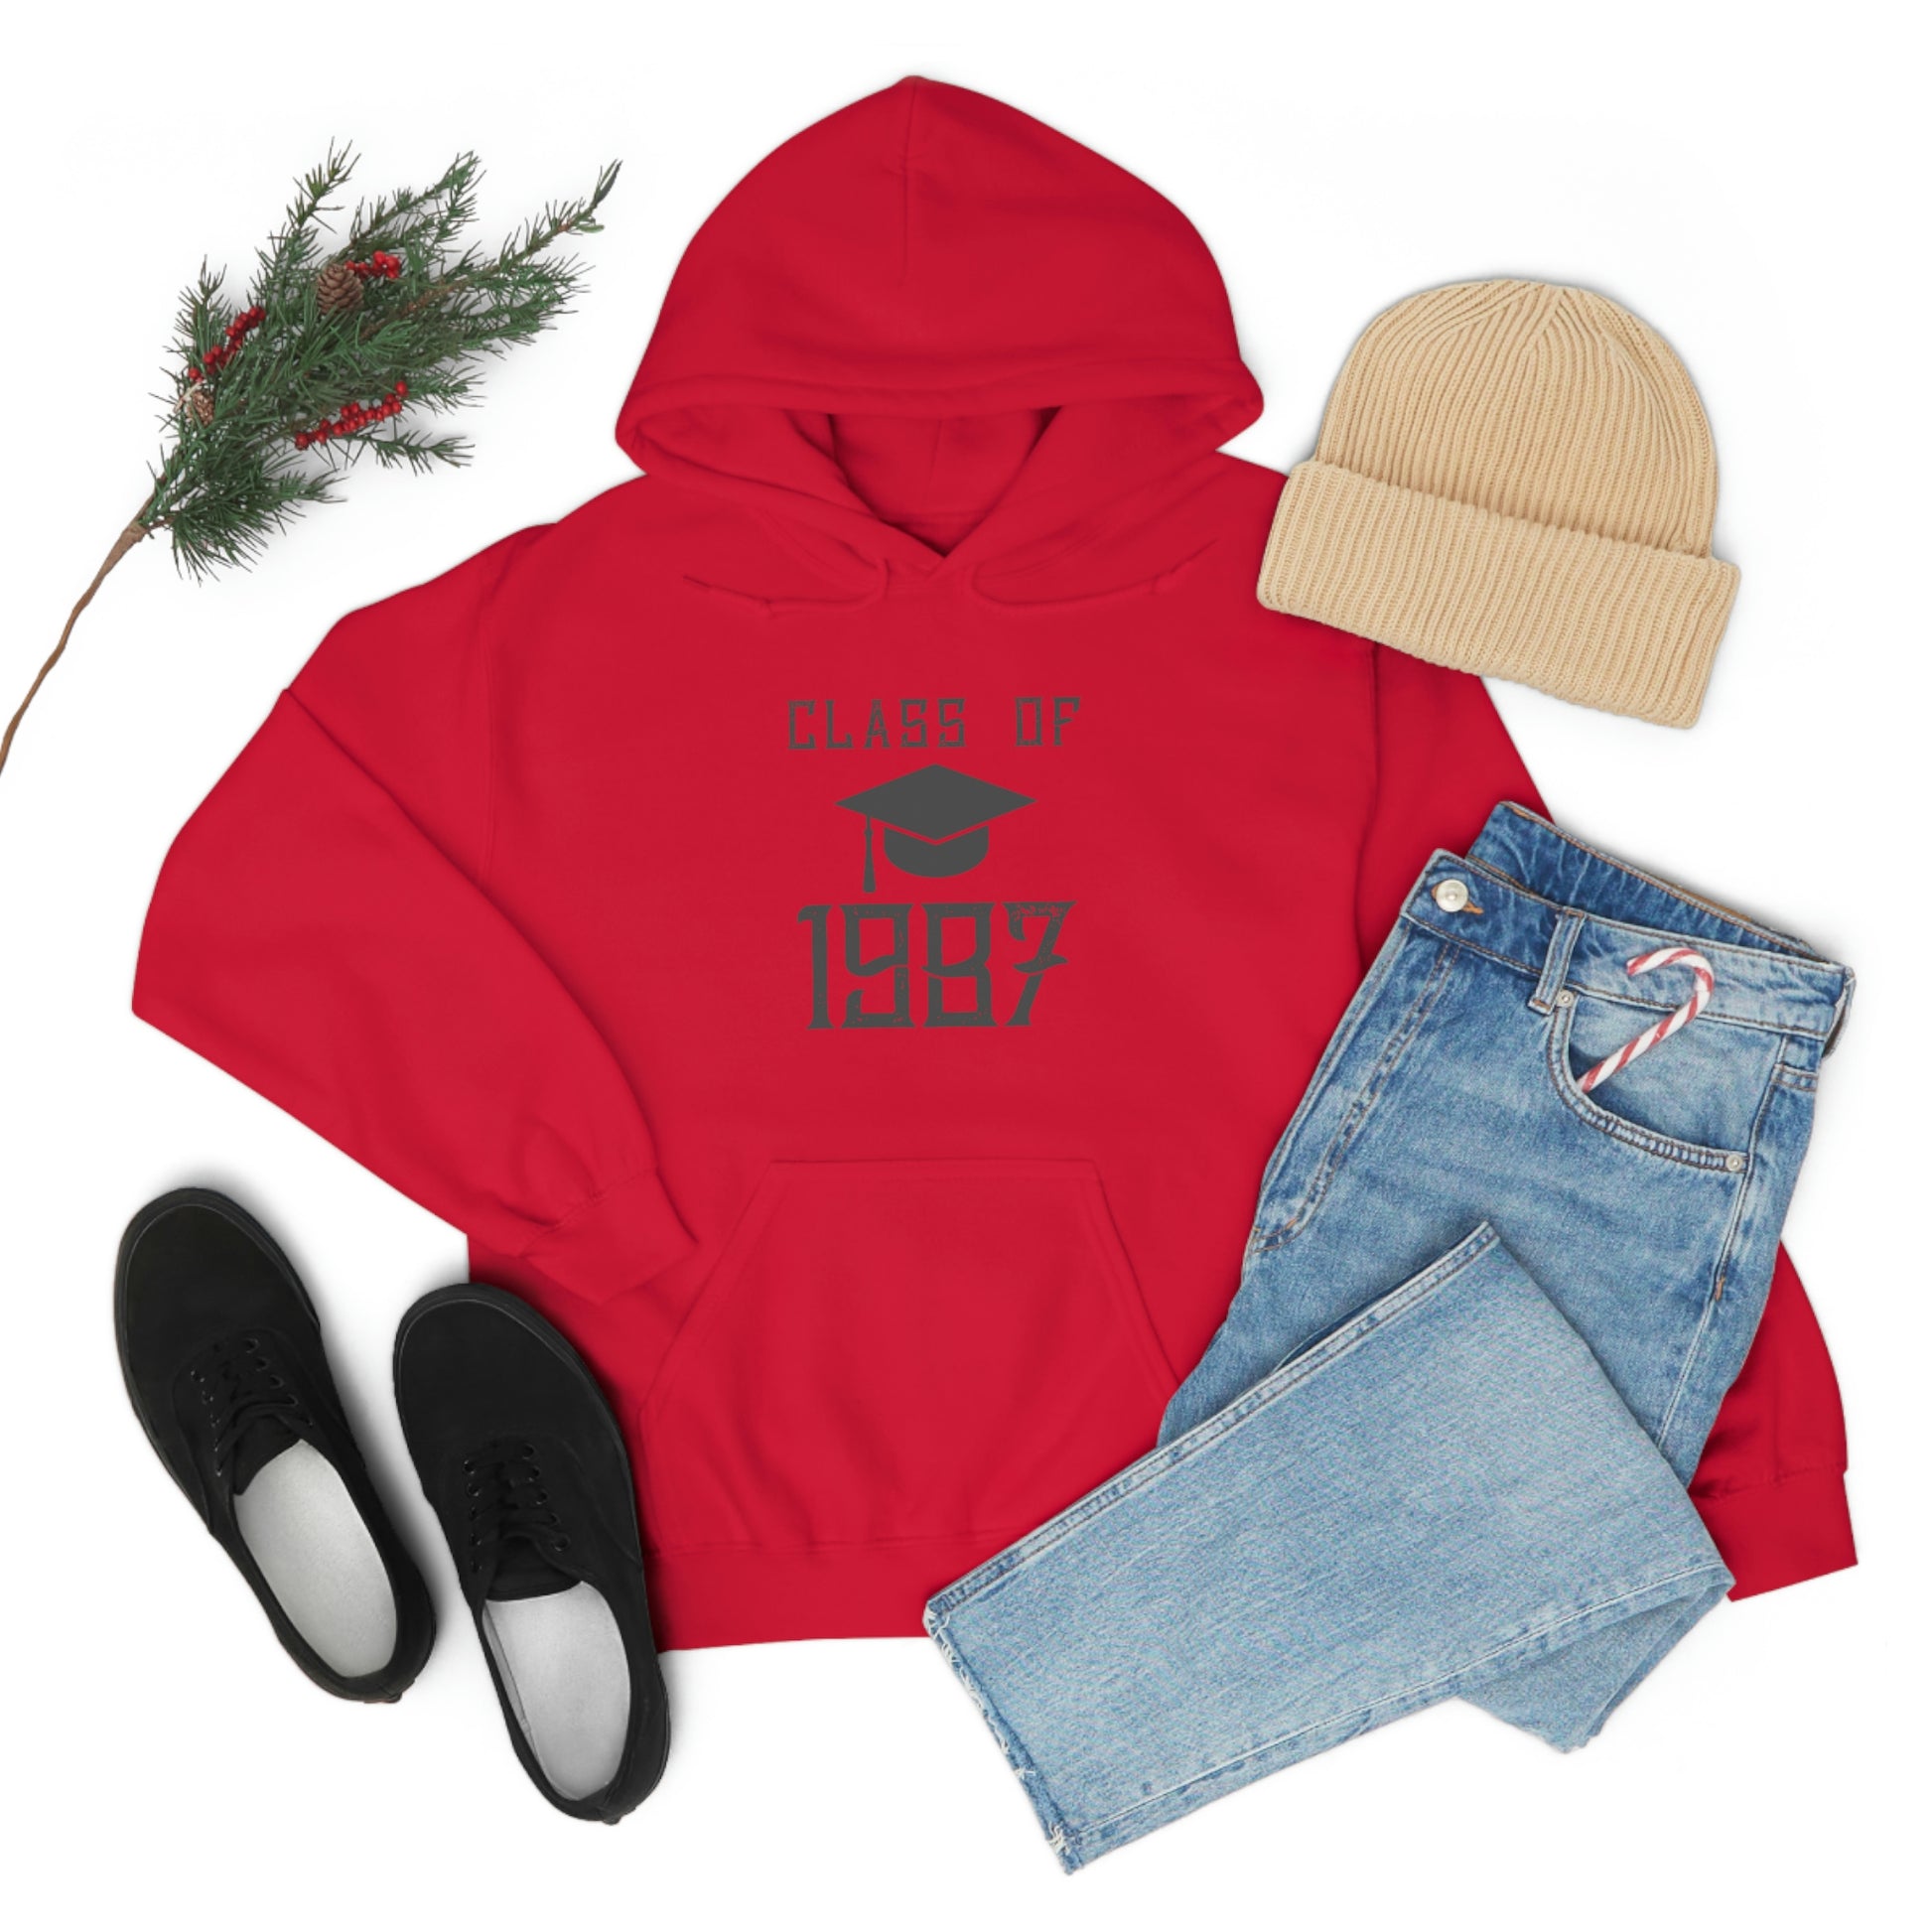 "Class Of 1987" Hoodie - Weave Got Gifts - Unique Gifts You Won’t Find Anywhere Else!